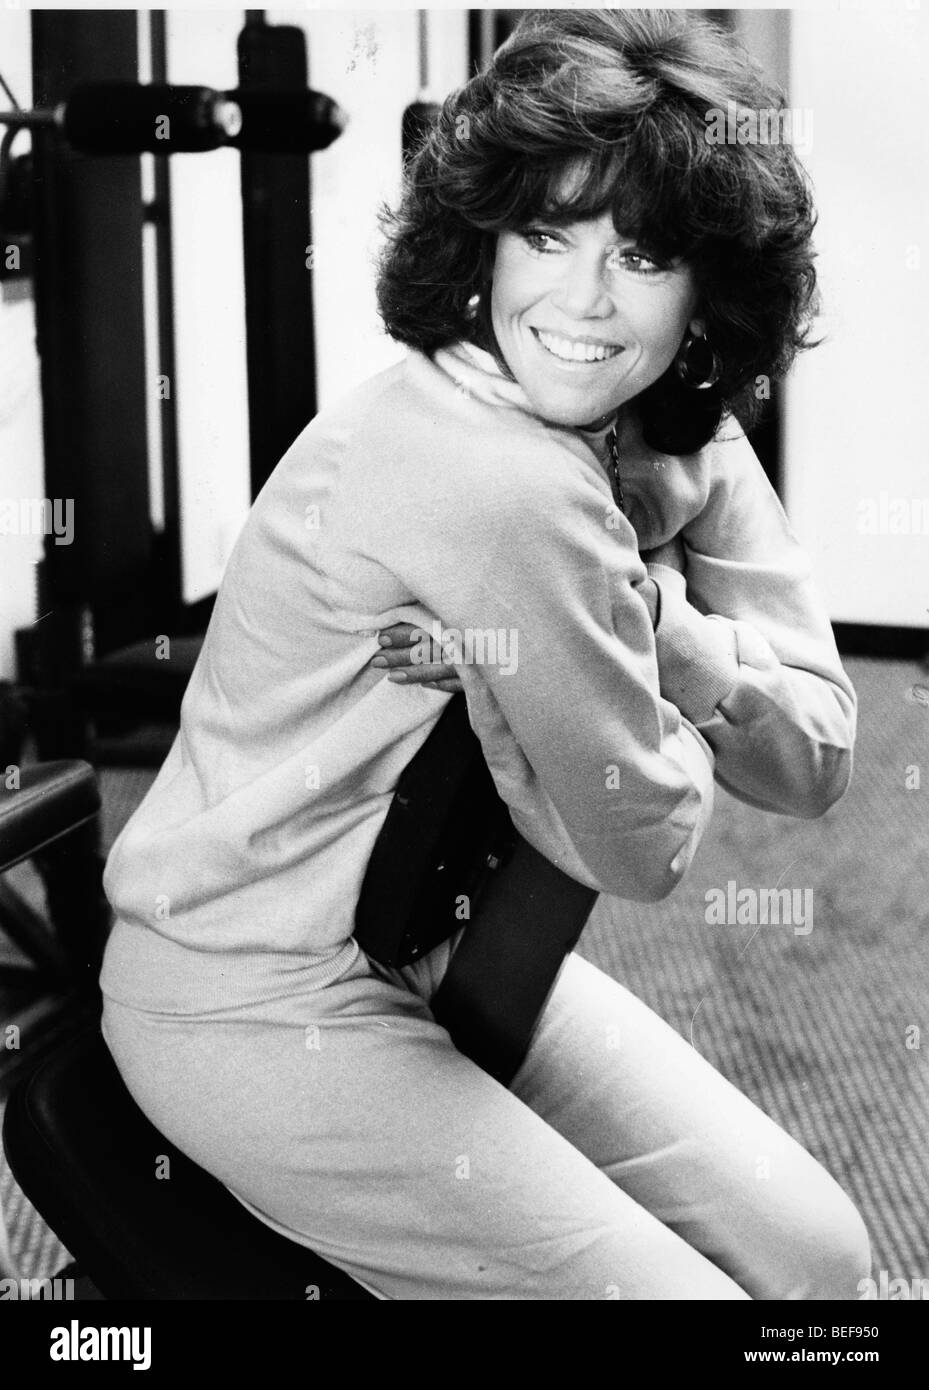 Actress Jane Fonda at the opening of her gym Stock Photo